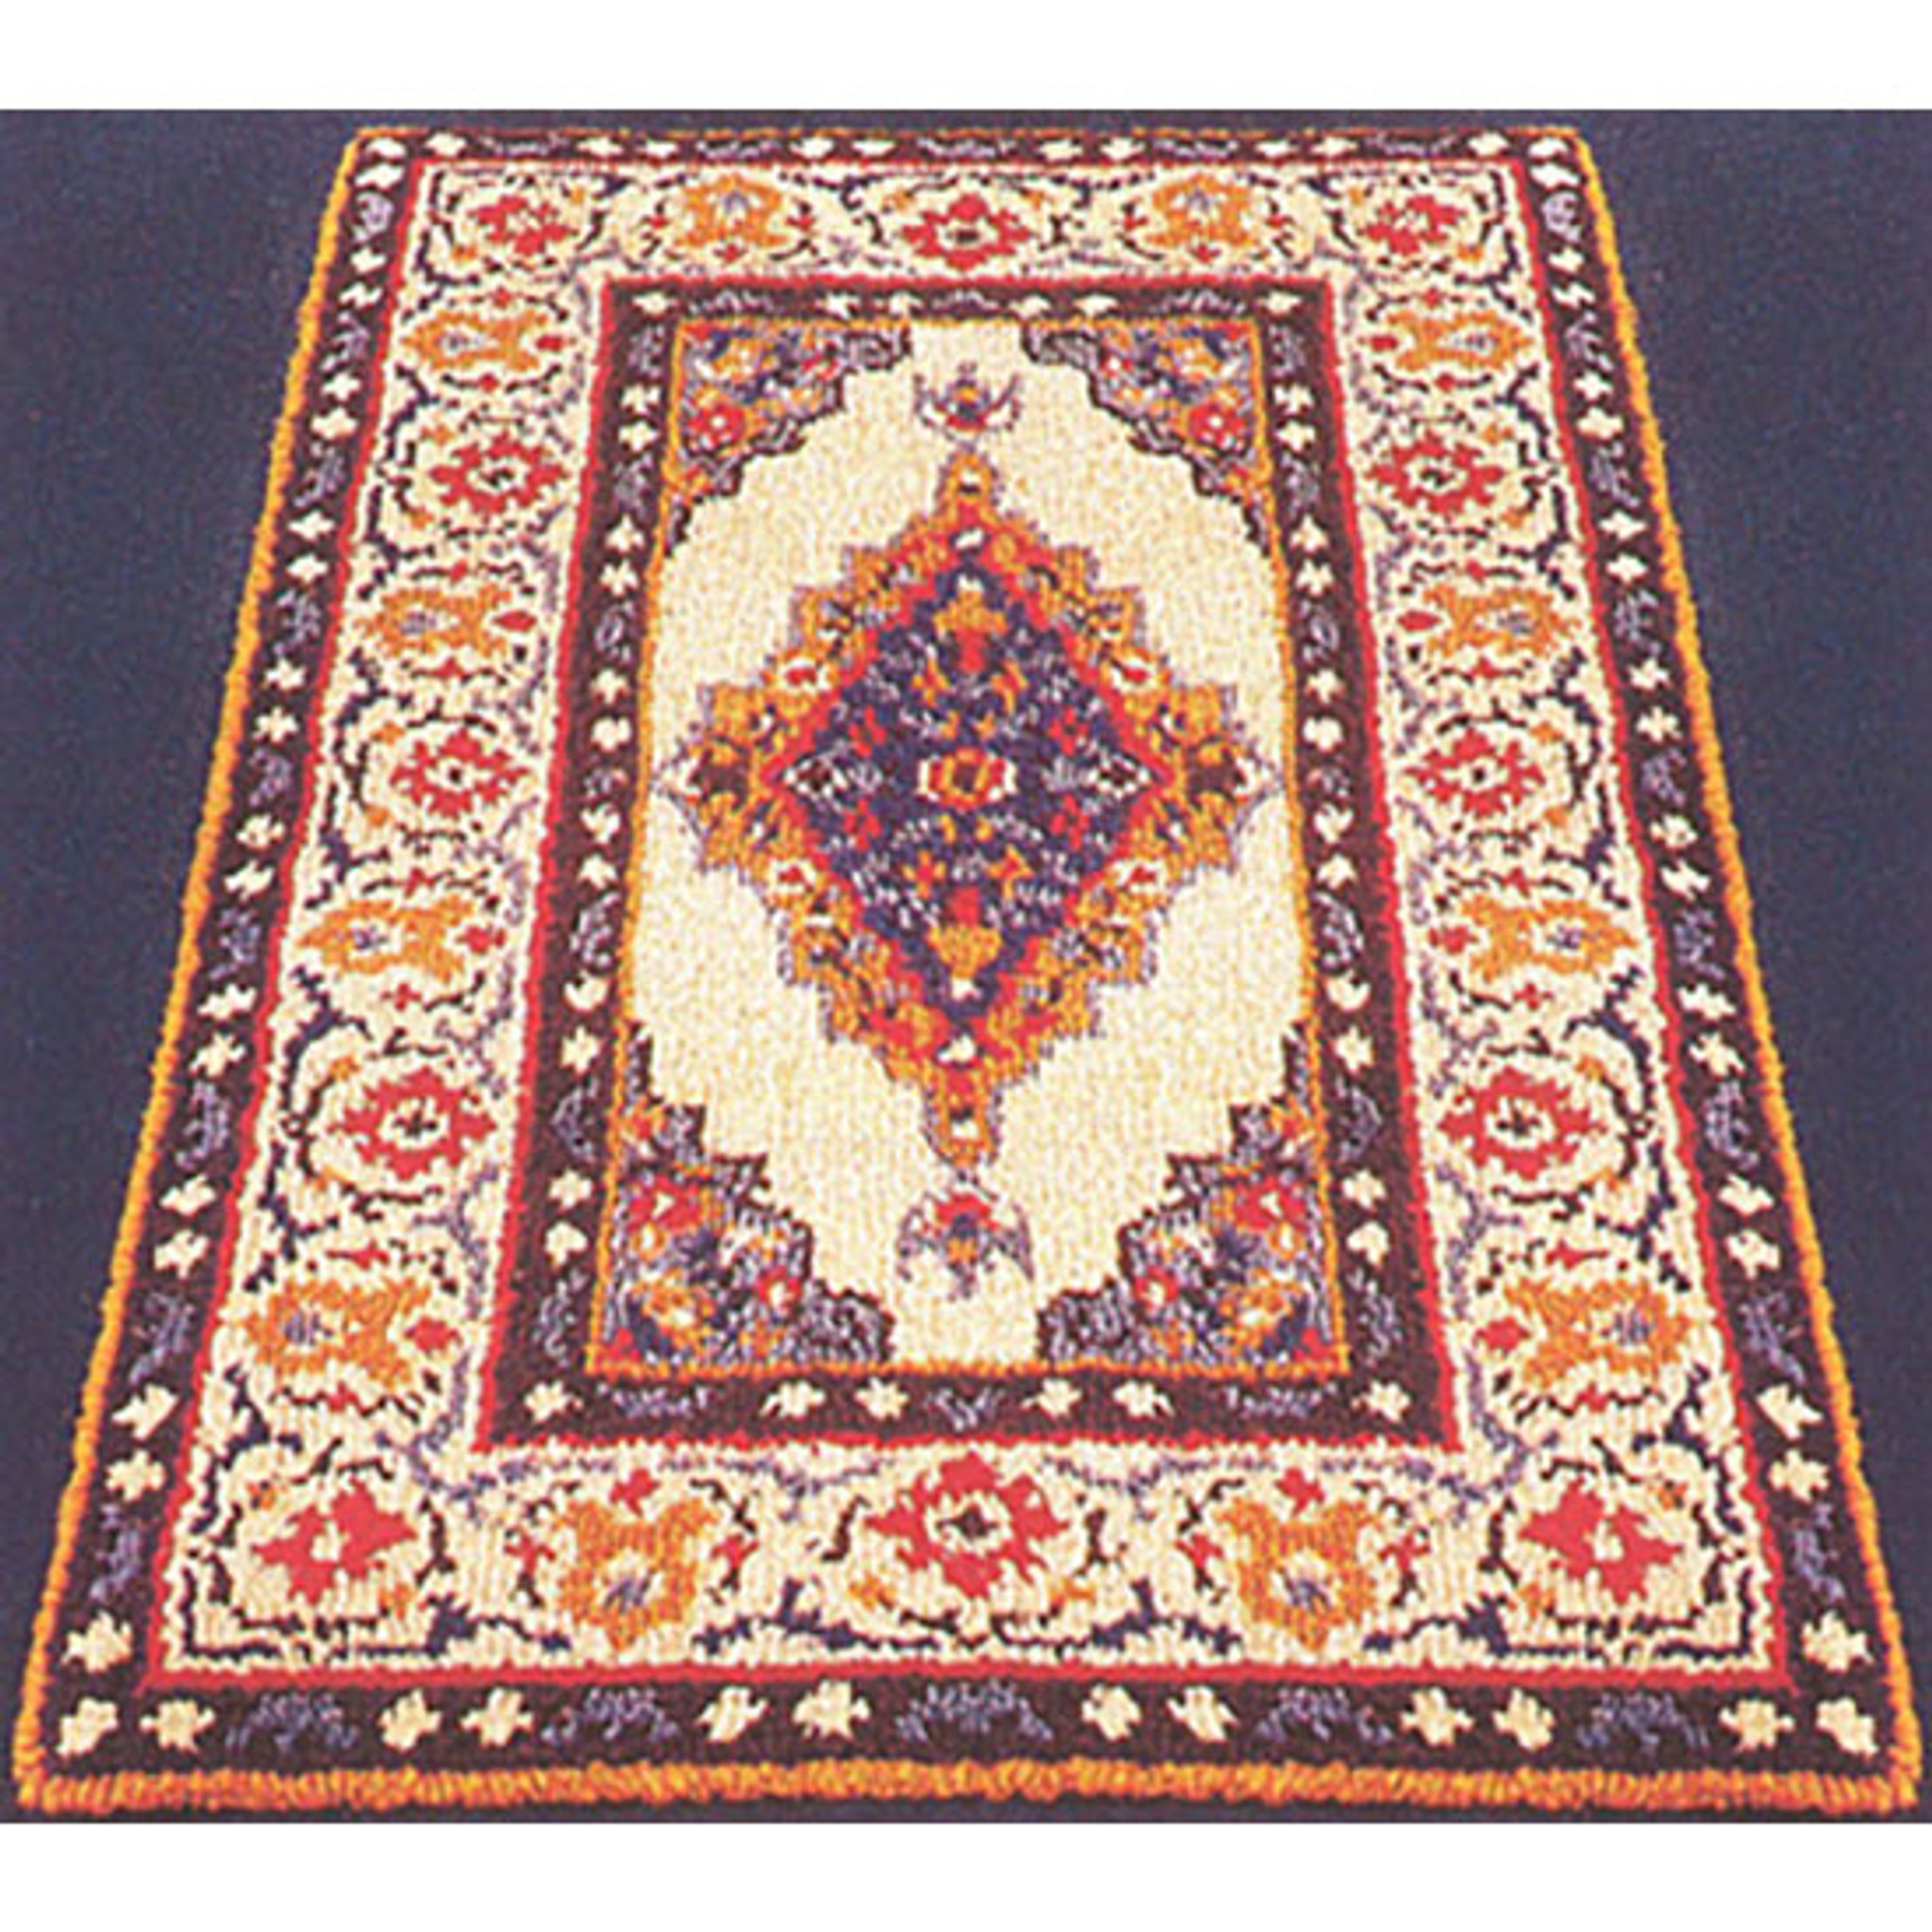 MeetBSelf Latch Hook Rug Kits for Adults Large Size Bahrain